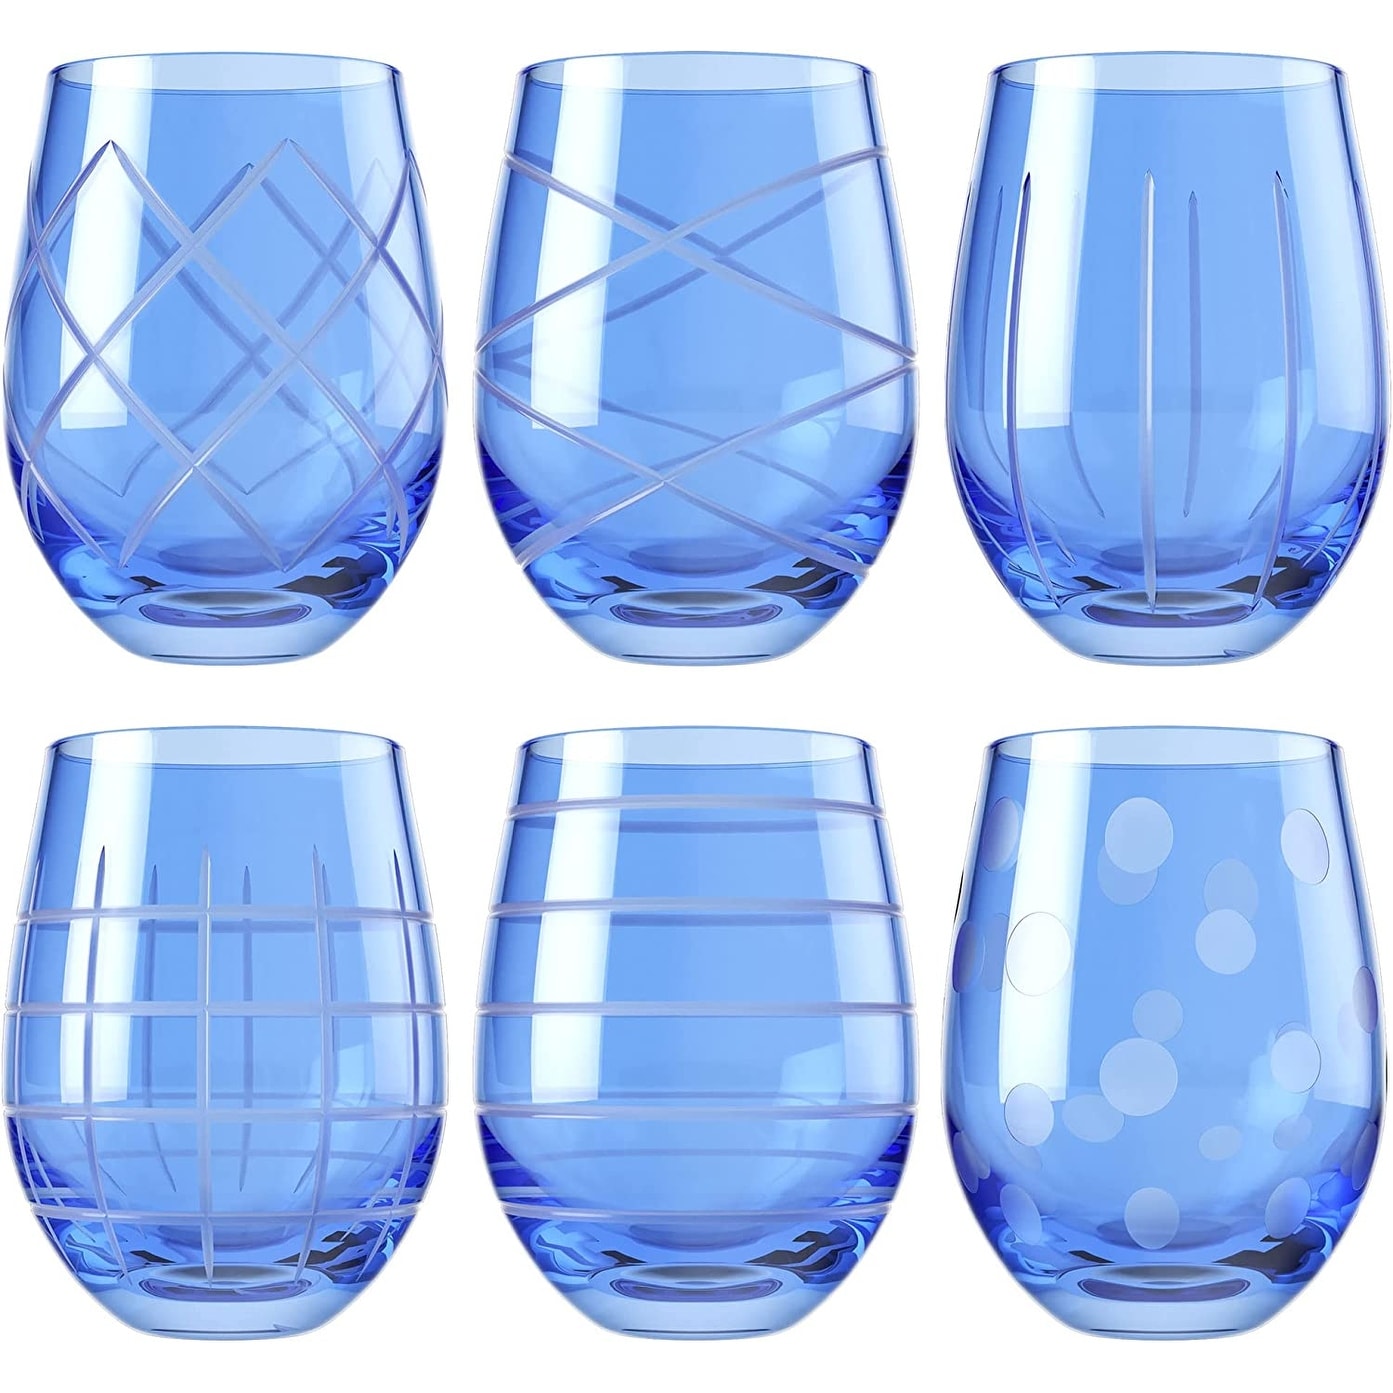 https://ak1.ostkcdn.com/images/products/is/images/direct/5f7ede50b19a602ce254b9cd8dcc355f94e2ad77/Fifth-Avenue-Medallion-Stemless-Wine-Crystal-Glass-Set-of-6.jpg